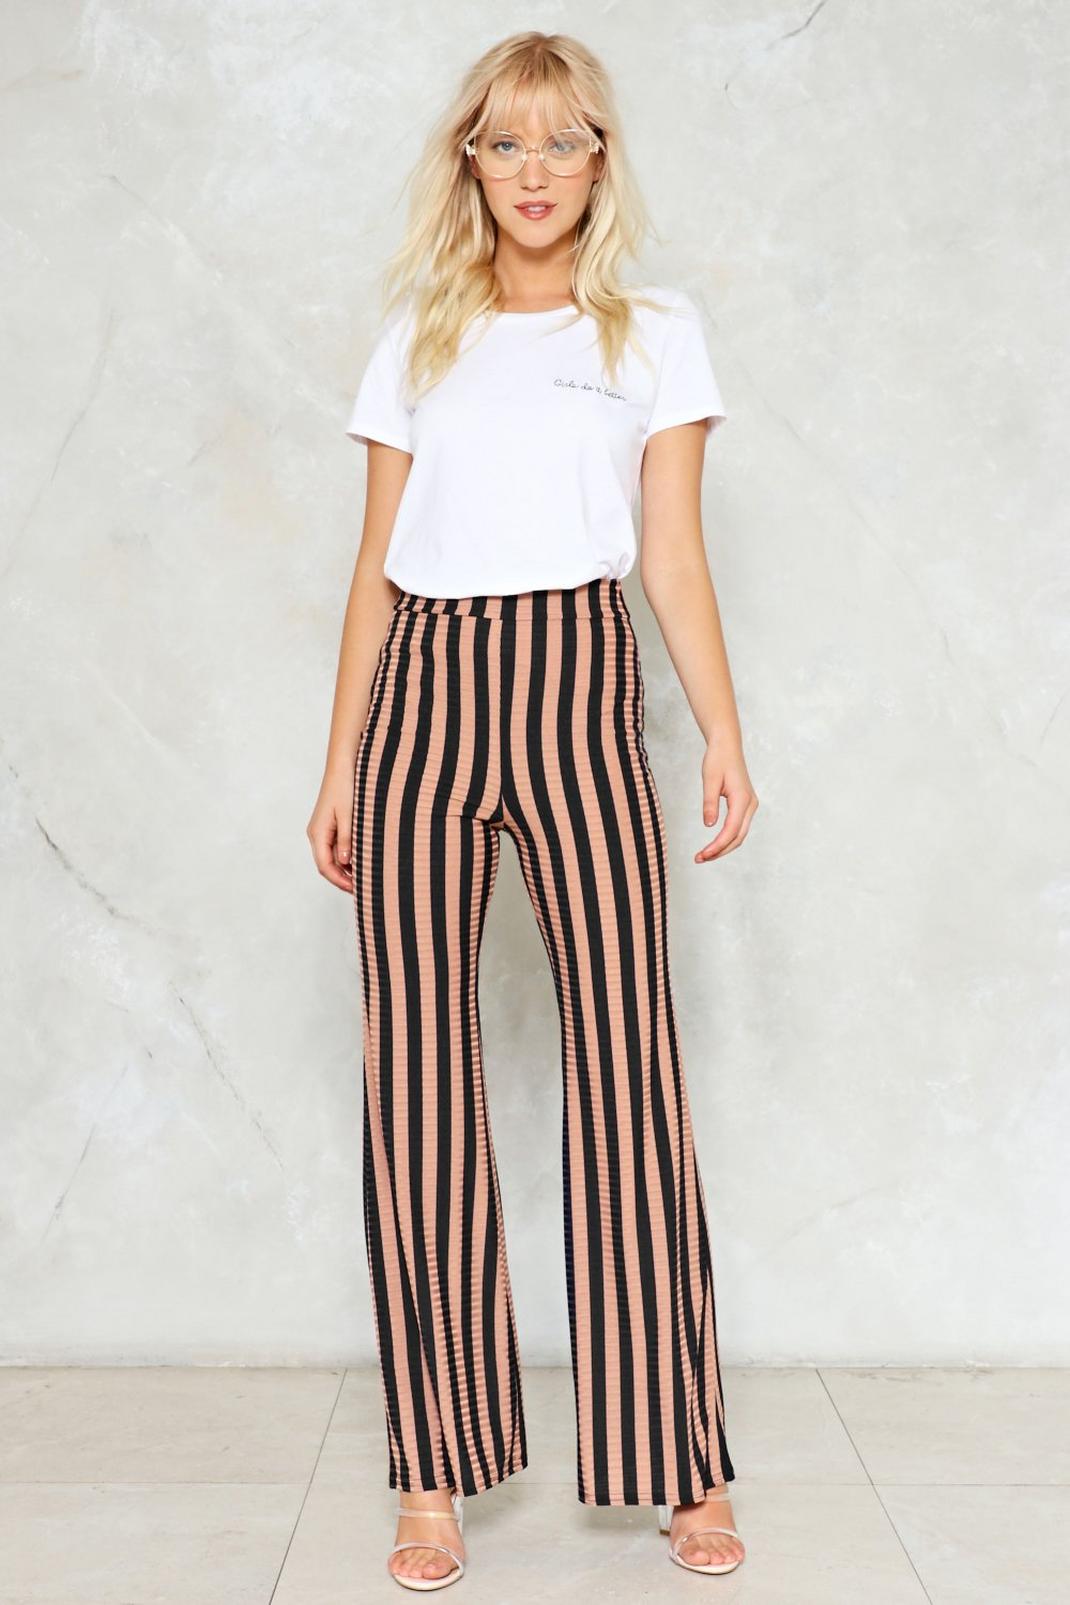 Flare to the Throne Striped Pants | Nasty Gal